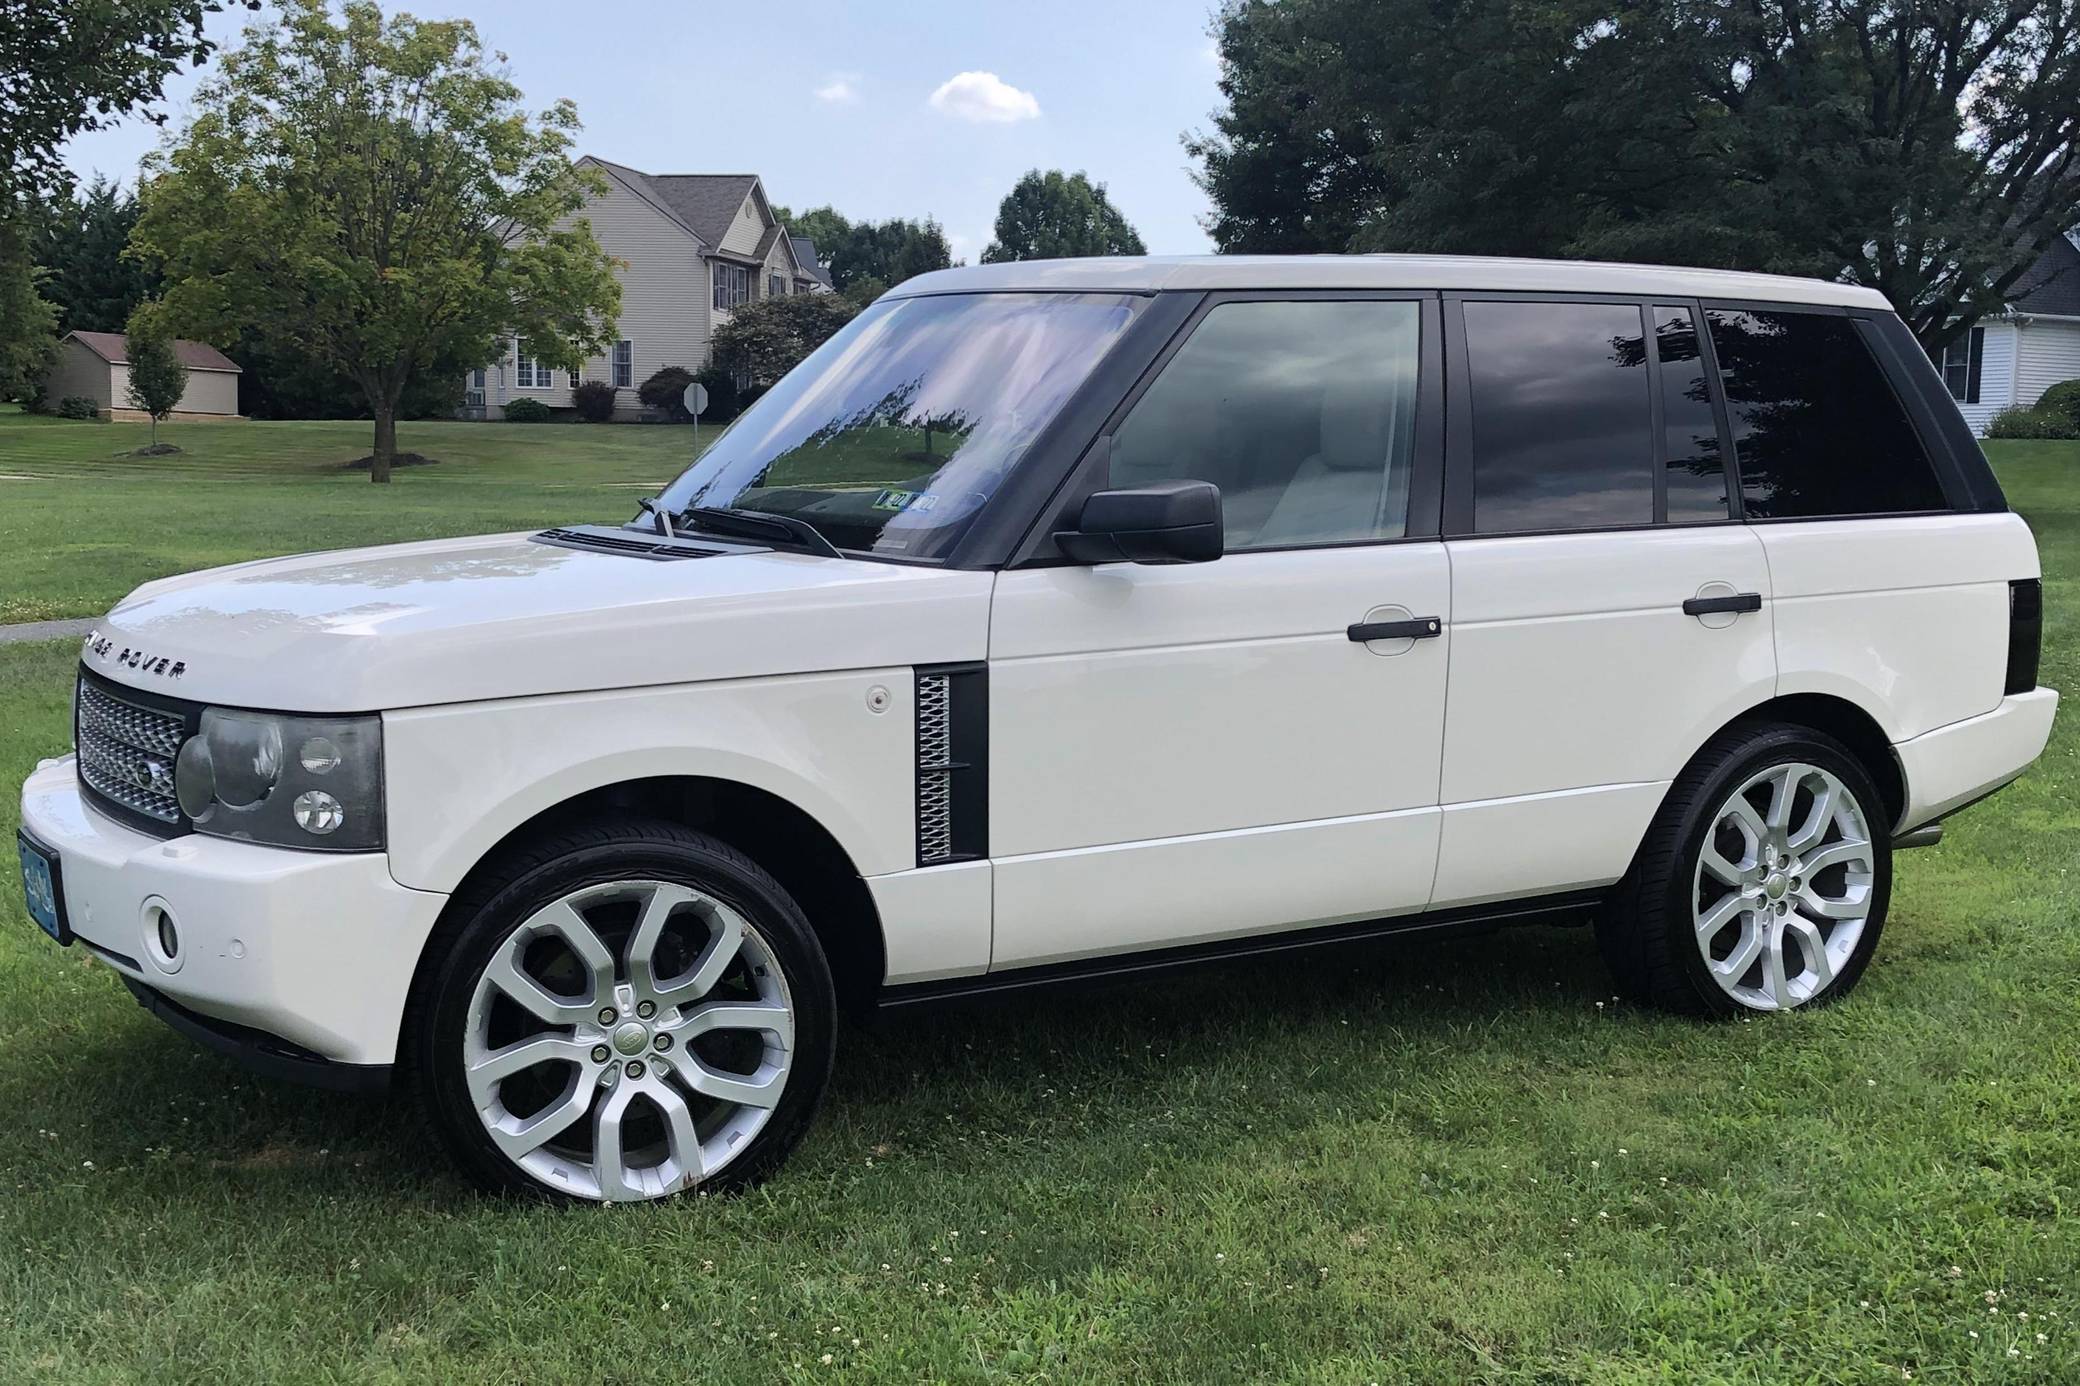 2009 Range Rover Autobiography for Sale - Cars & Bids